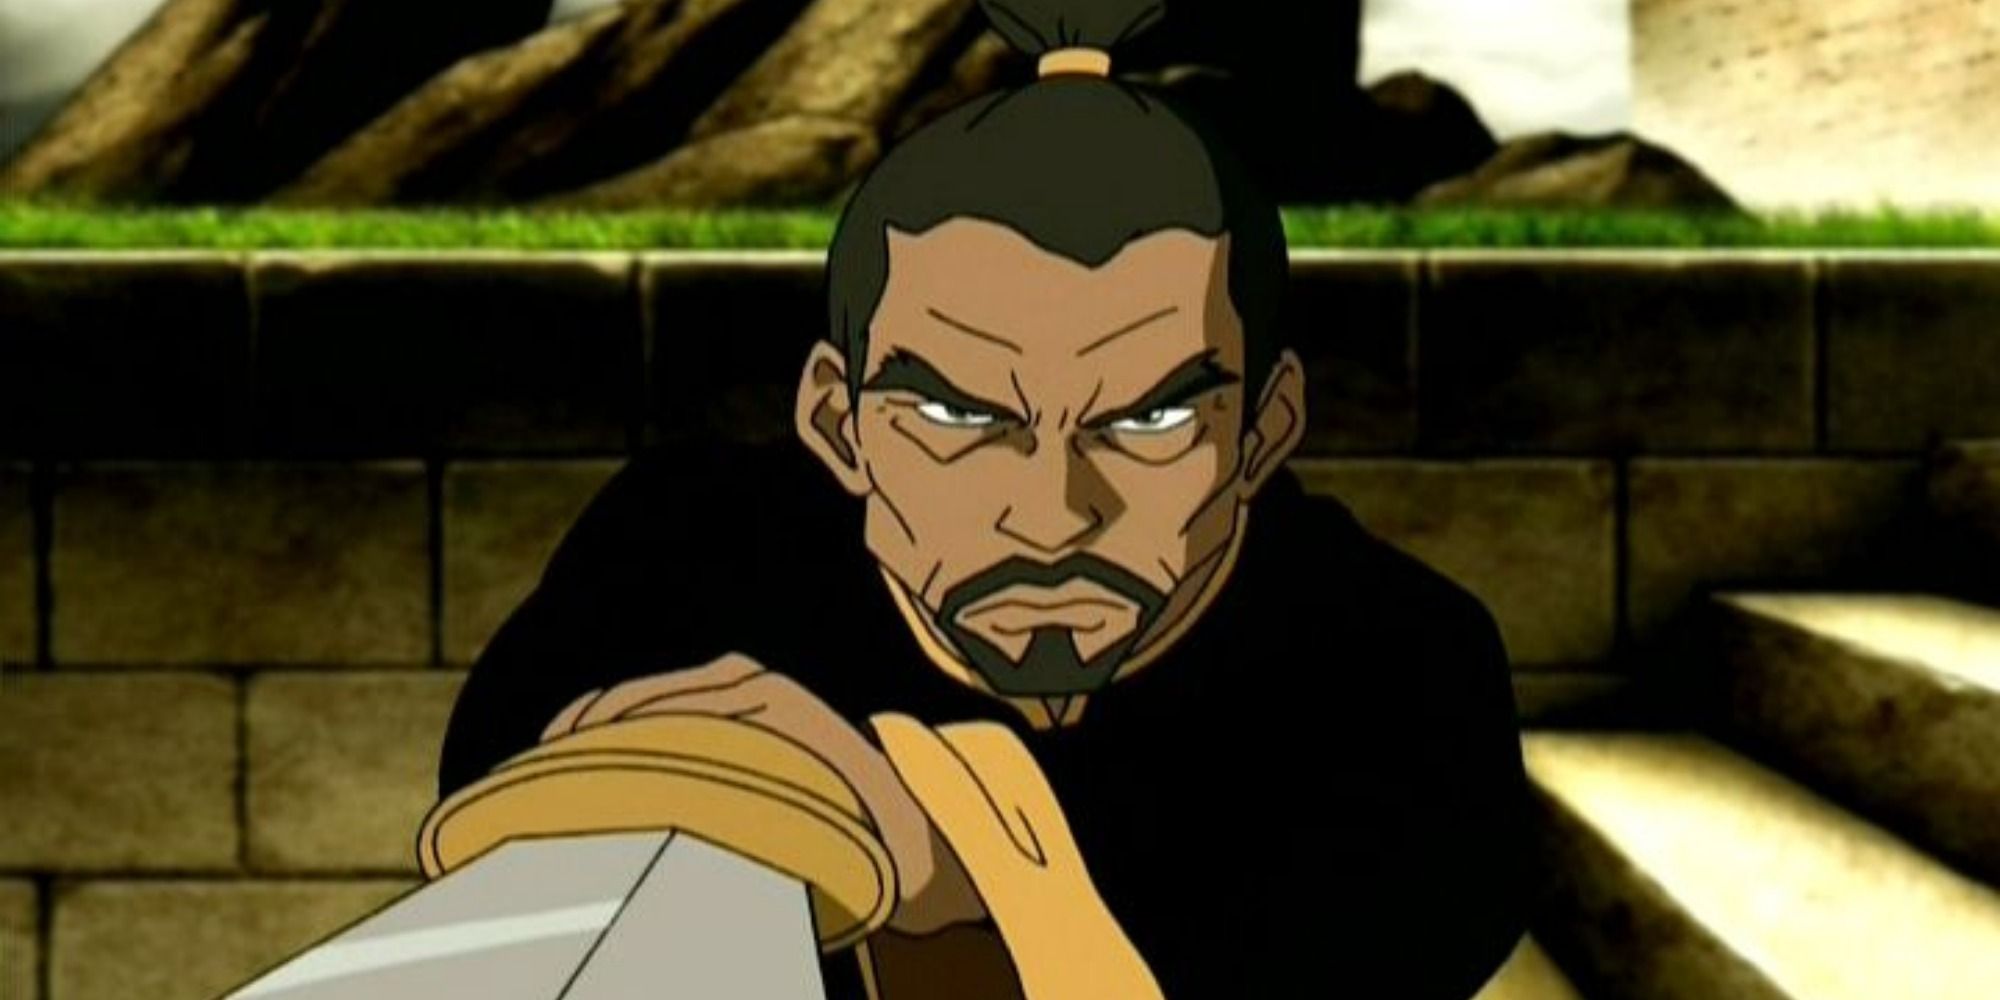 A profile screenshot of Piandao wielding a sword from Avatar: The Last Airbender